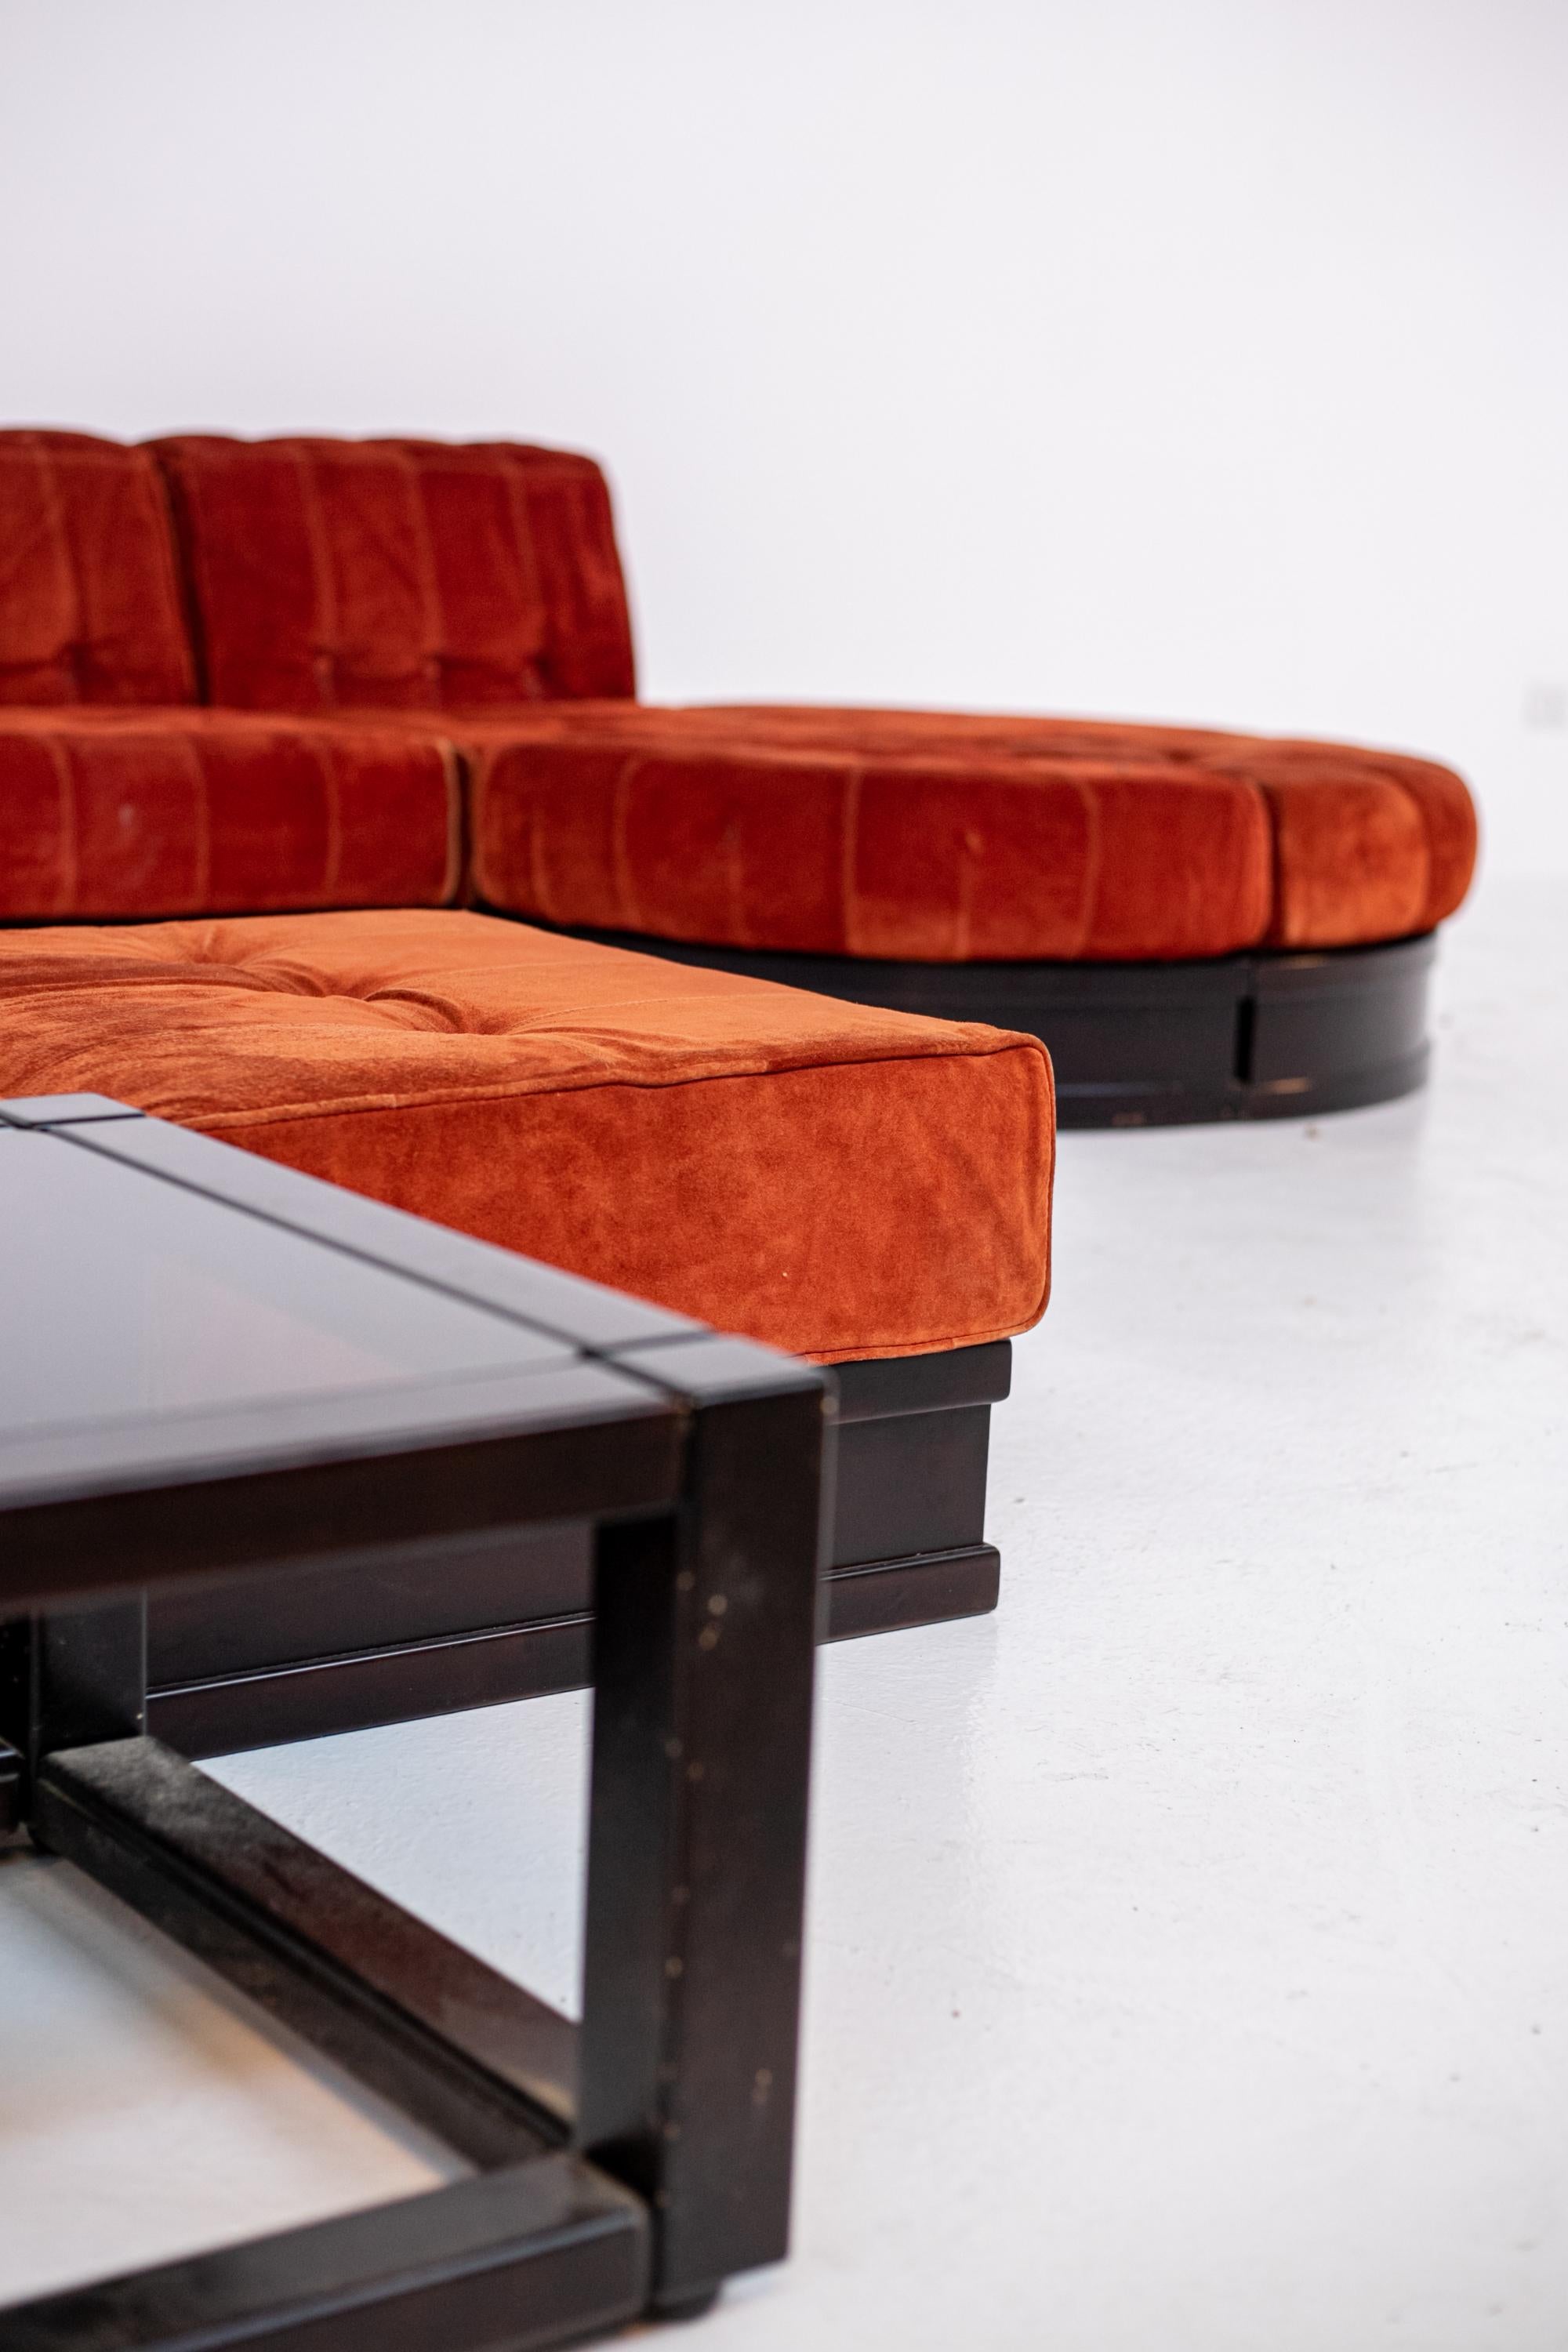 Mid-20th Century Italian Big Sofa Mod. Cancan by Luciano Frigerio in Orange Velvet and Side Table